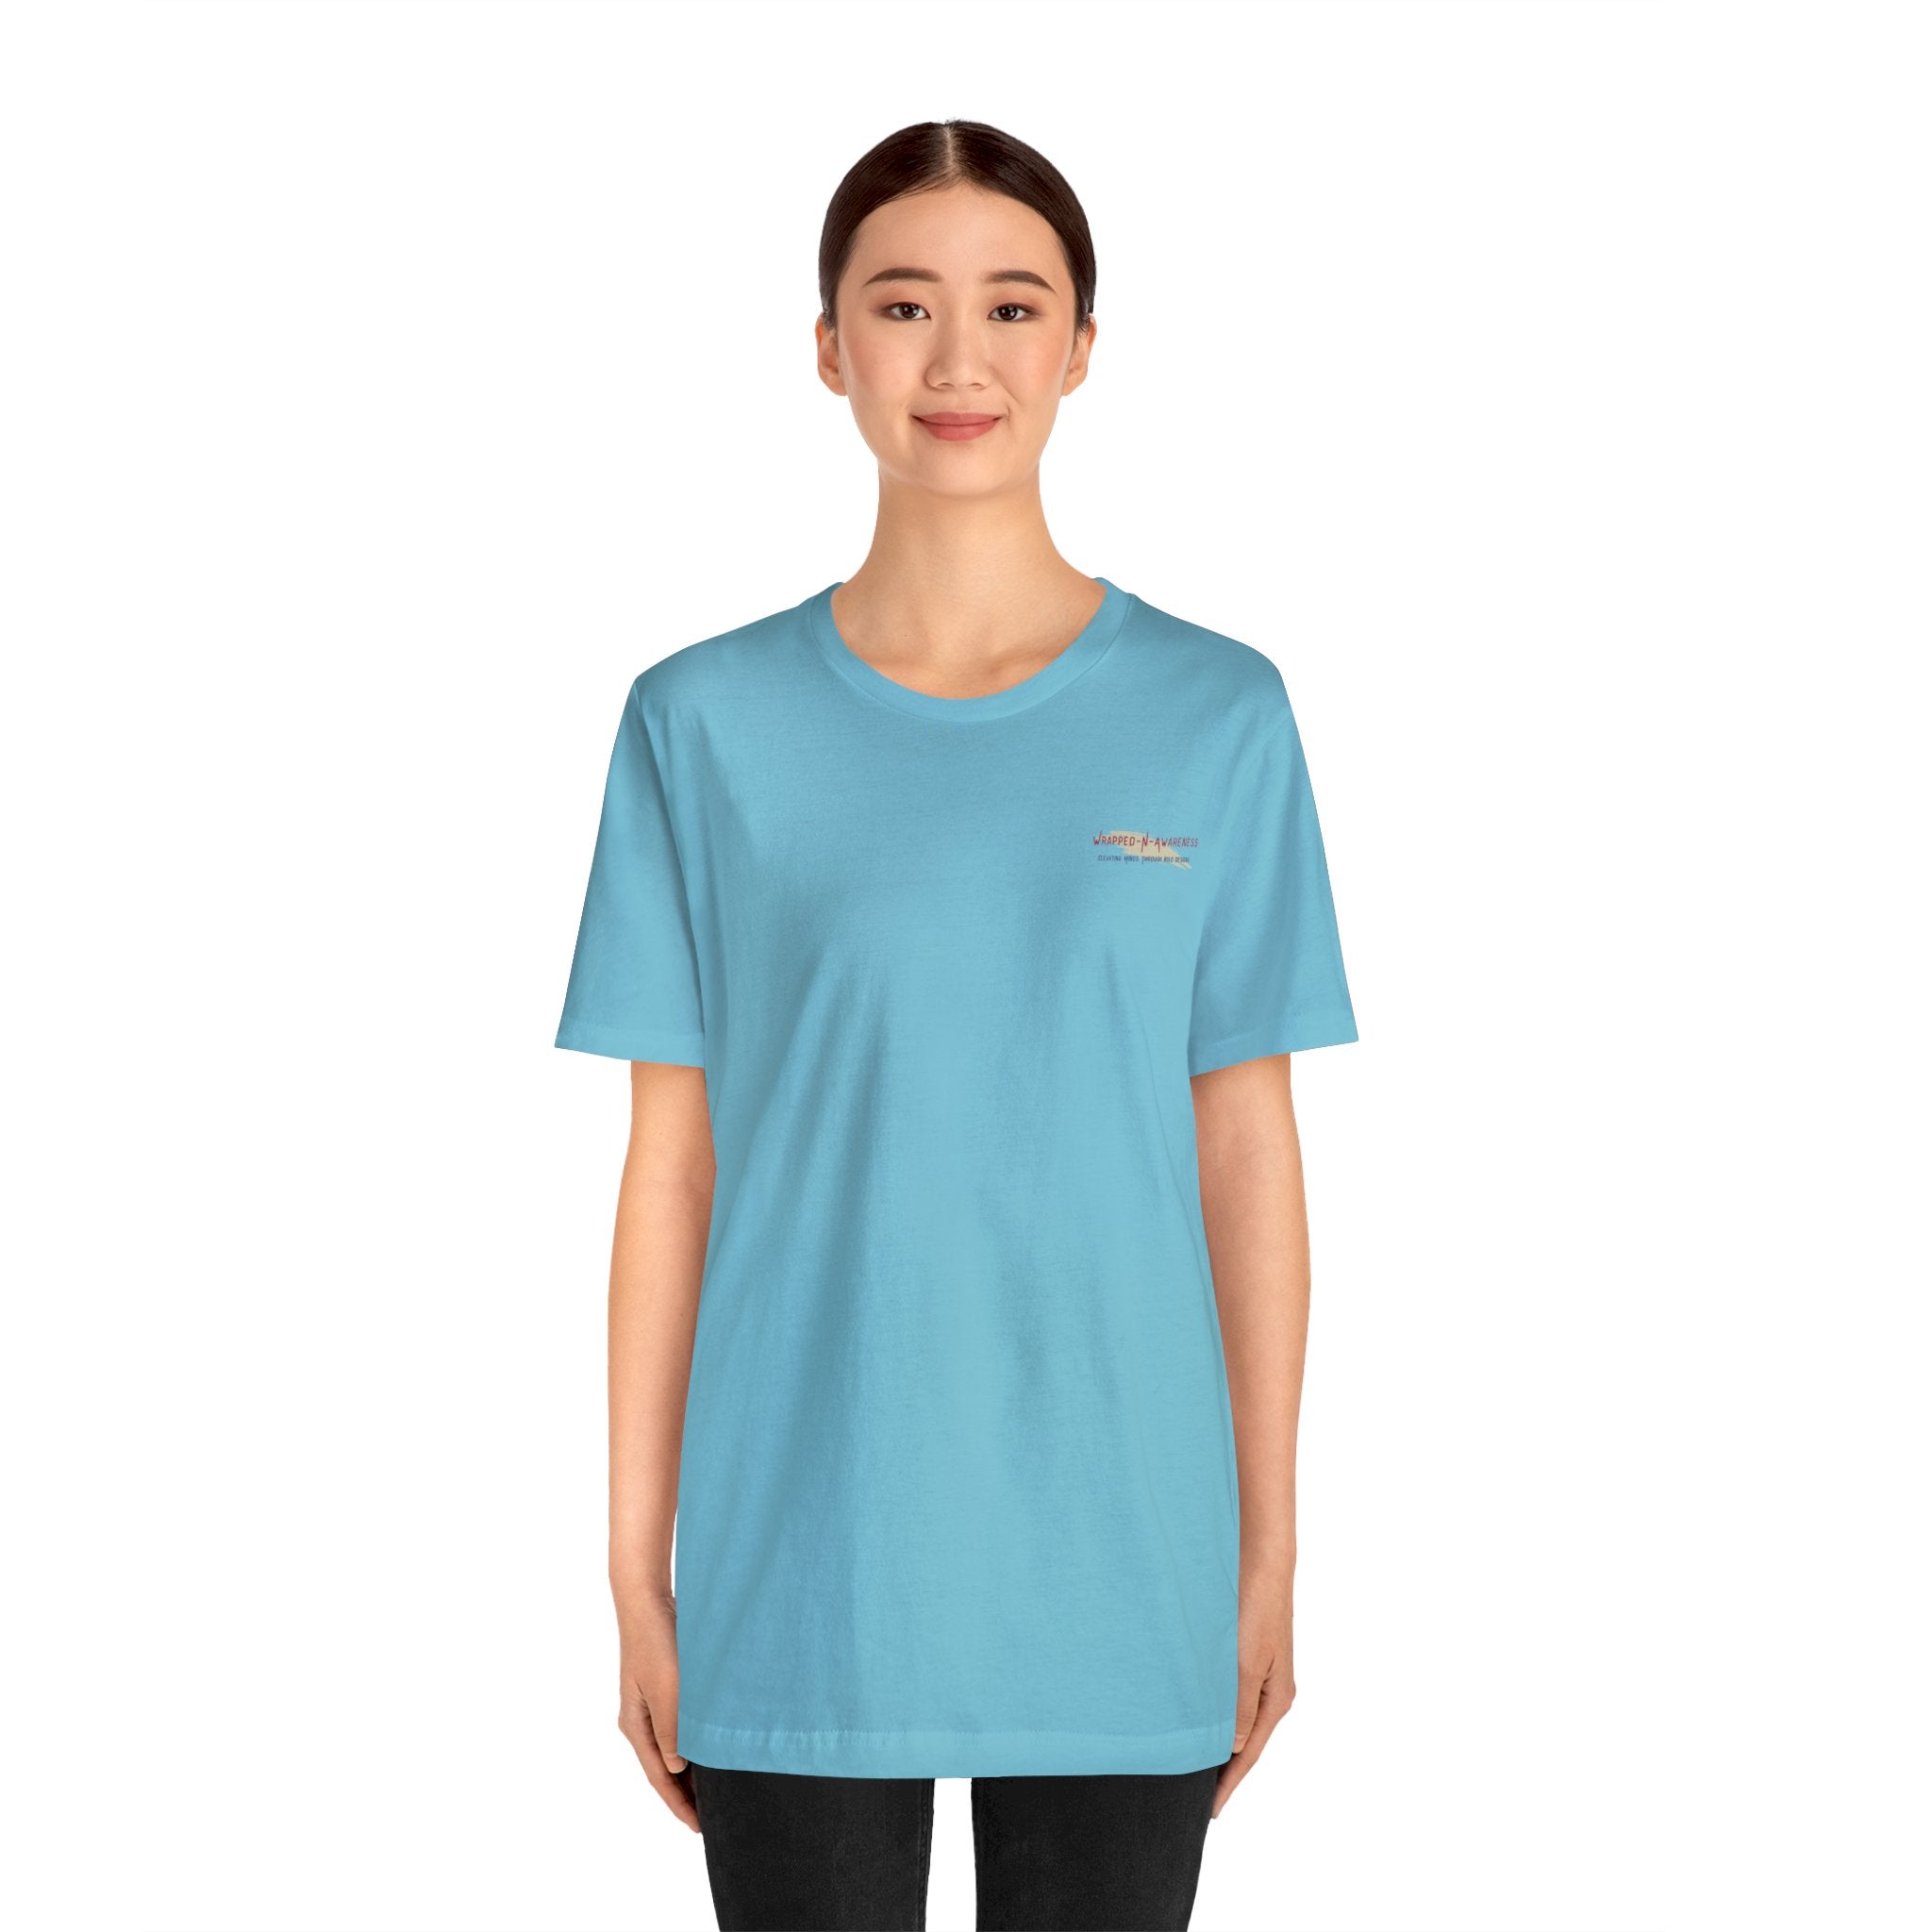 Embrace Self-Care Jersey Tee - Bella+Canvas 3001 Heather Mauve Airlume Cotton Bella+Canvas 3001 Crew Neckline Jersey Short Sleeve Lightweight Fabric Mental Health Support Retail Fit Tear-away Label Tee Unisex Tee T-Shirt 12799677171844230218_2048 Printify